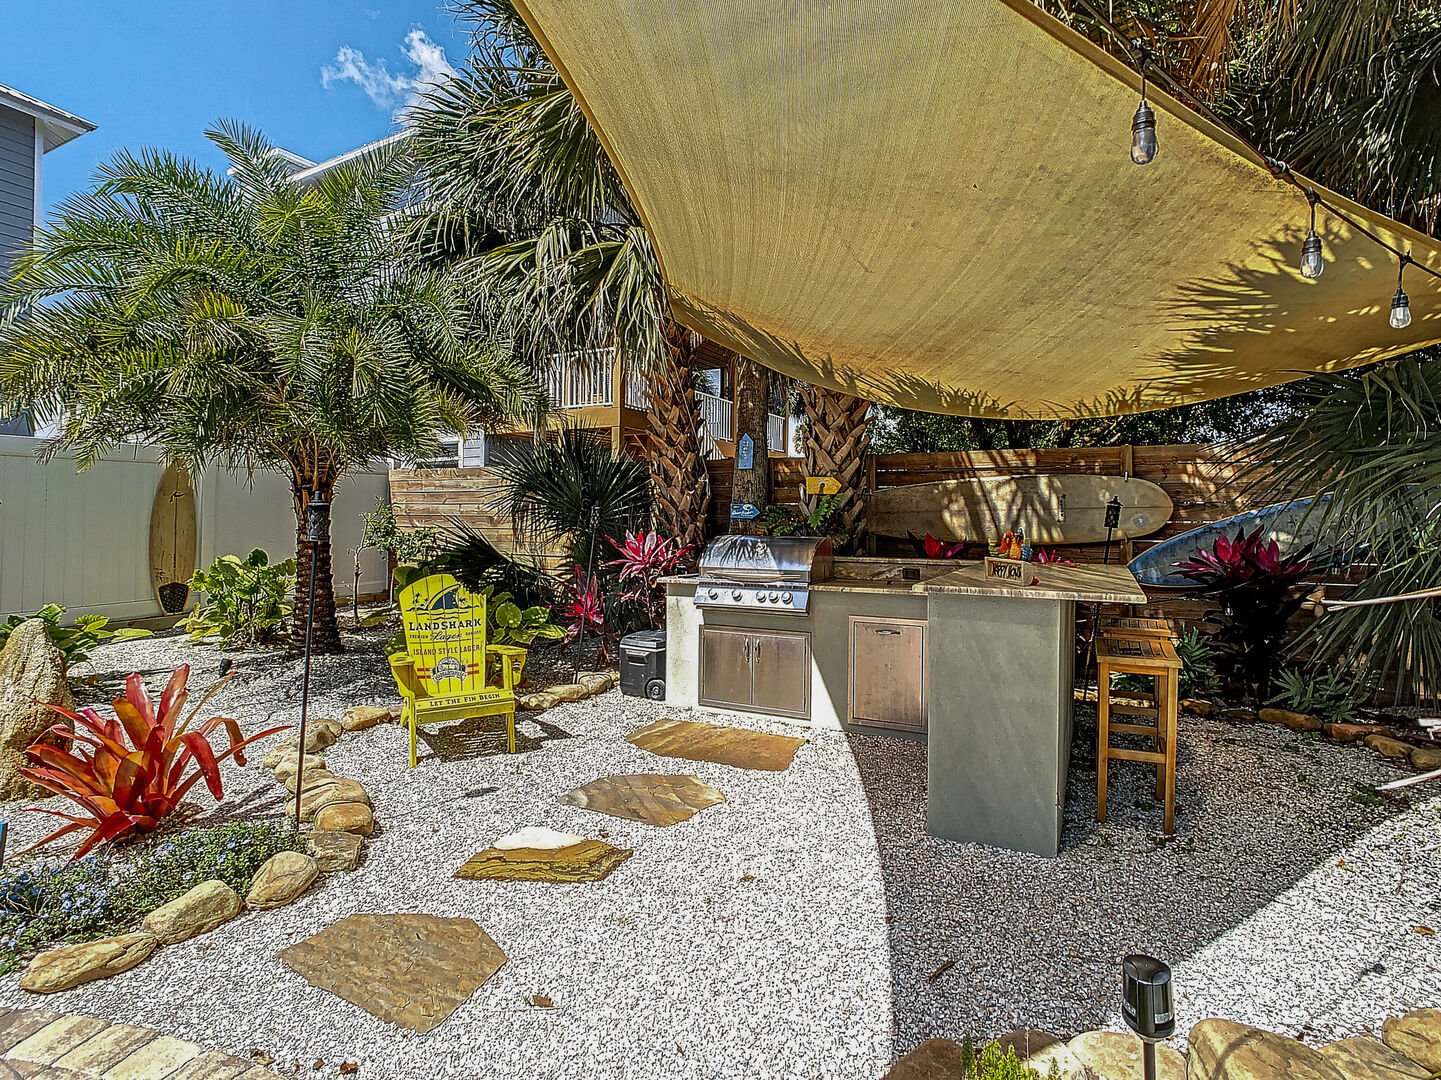 A backyard with a seating area, bar and gas bar-b-que grill.